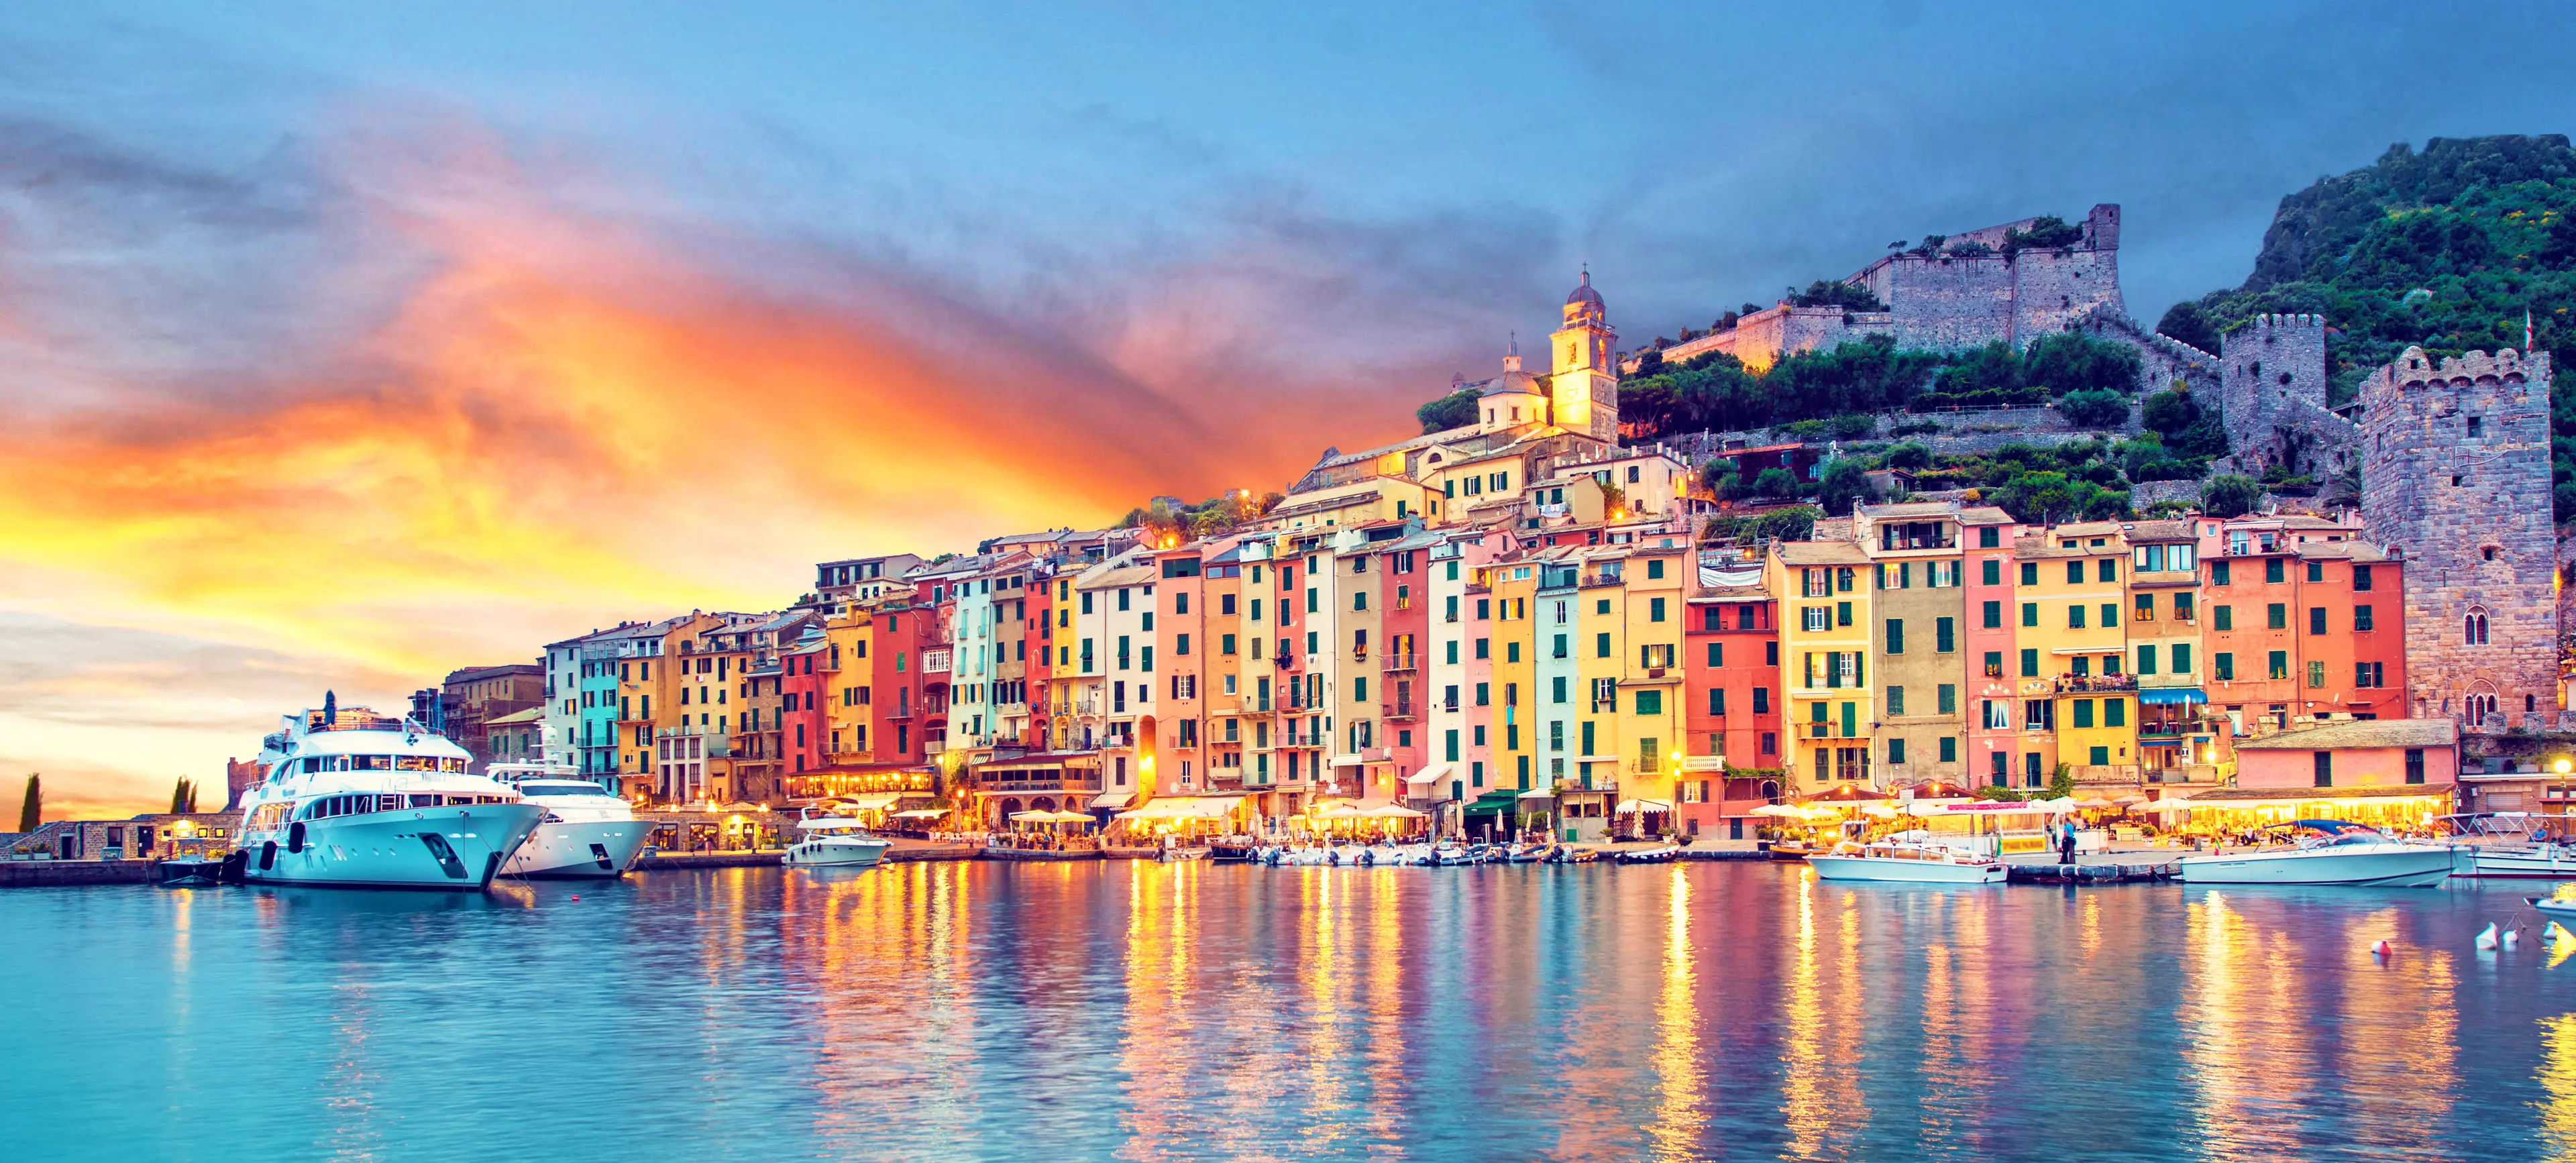 2-Day Unforgettable Itinerary to Cinque Terre, Italy